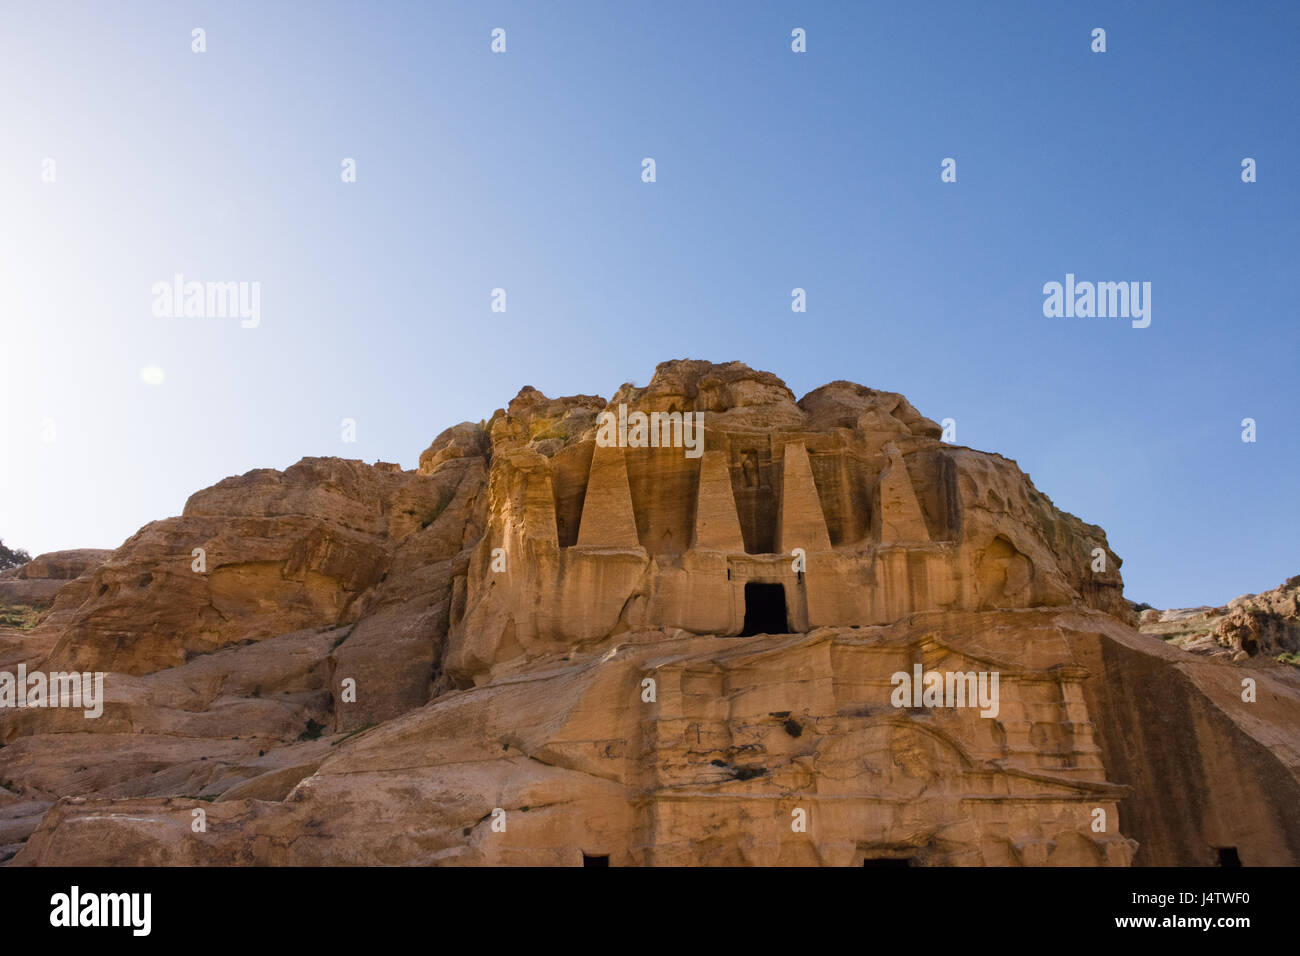 Carved Doric column facade of the Obelisk Tomb, Bab as-Siq, Petra Jordan with the Triclinium beneath it. Photographed from below with blue sky above. Stock Photo